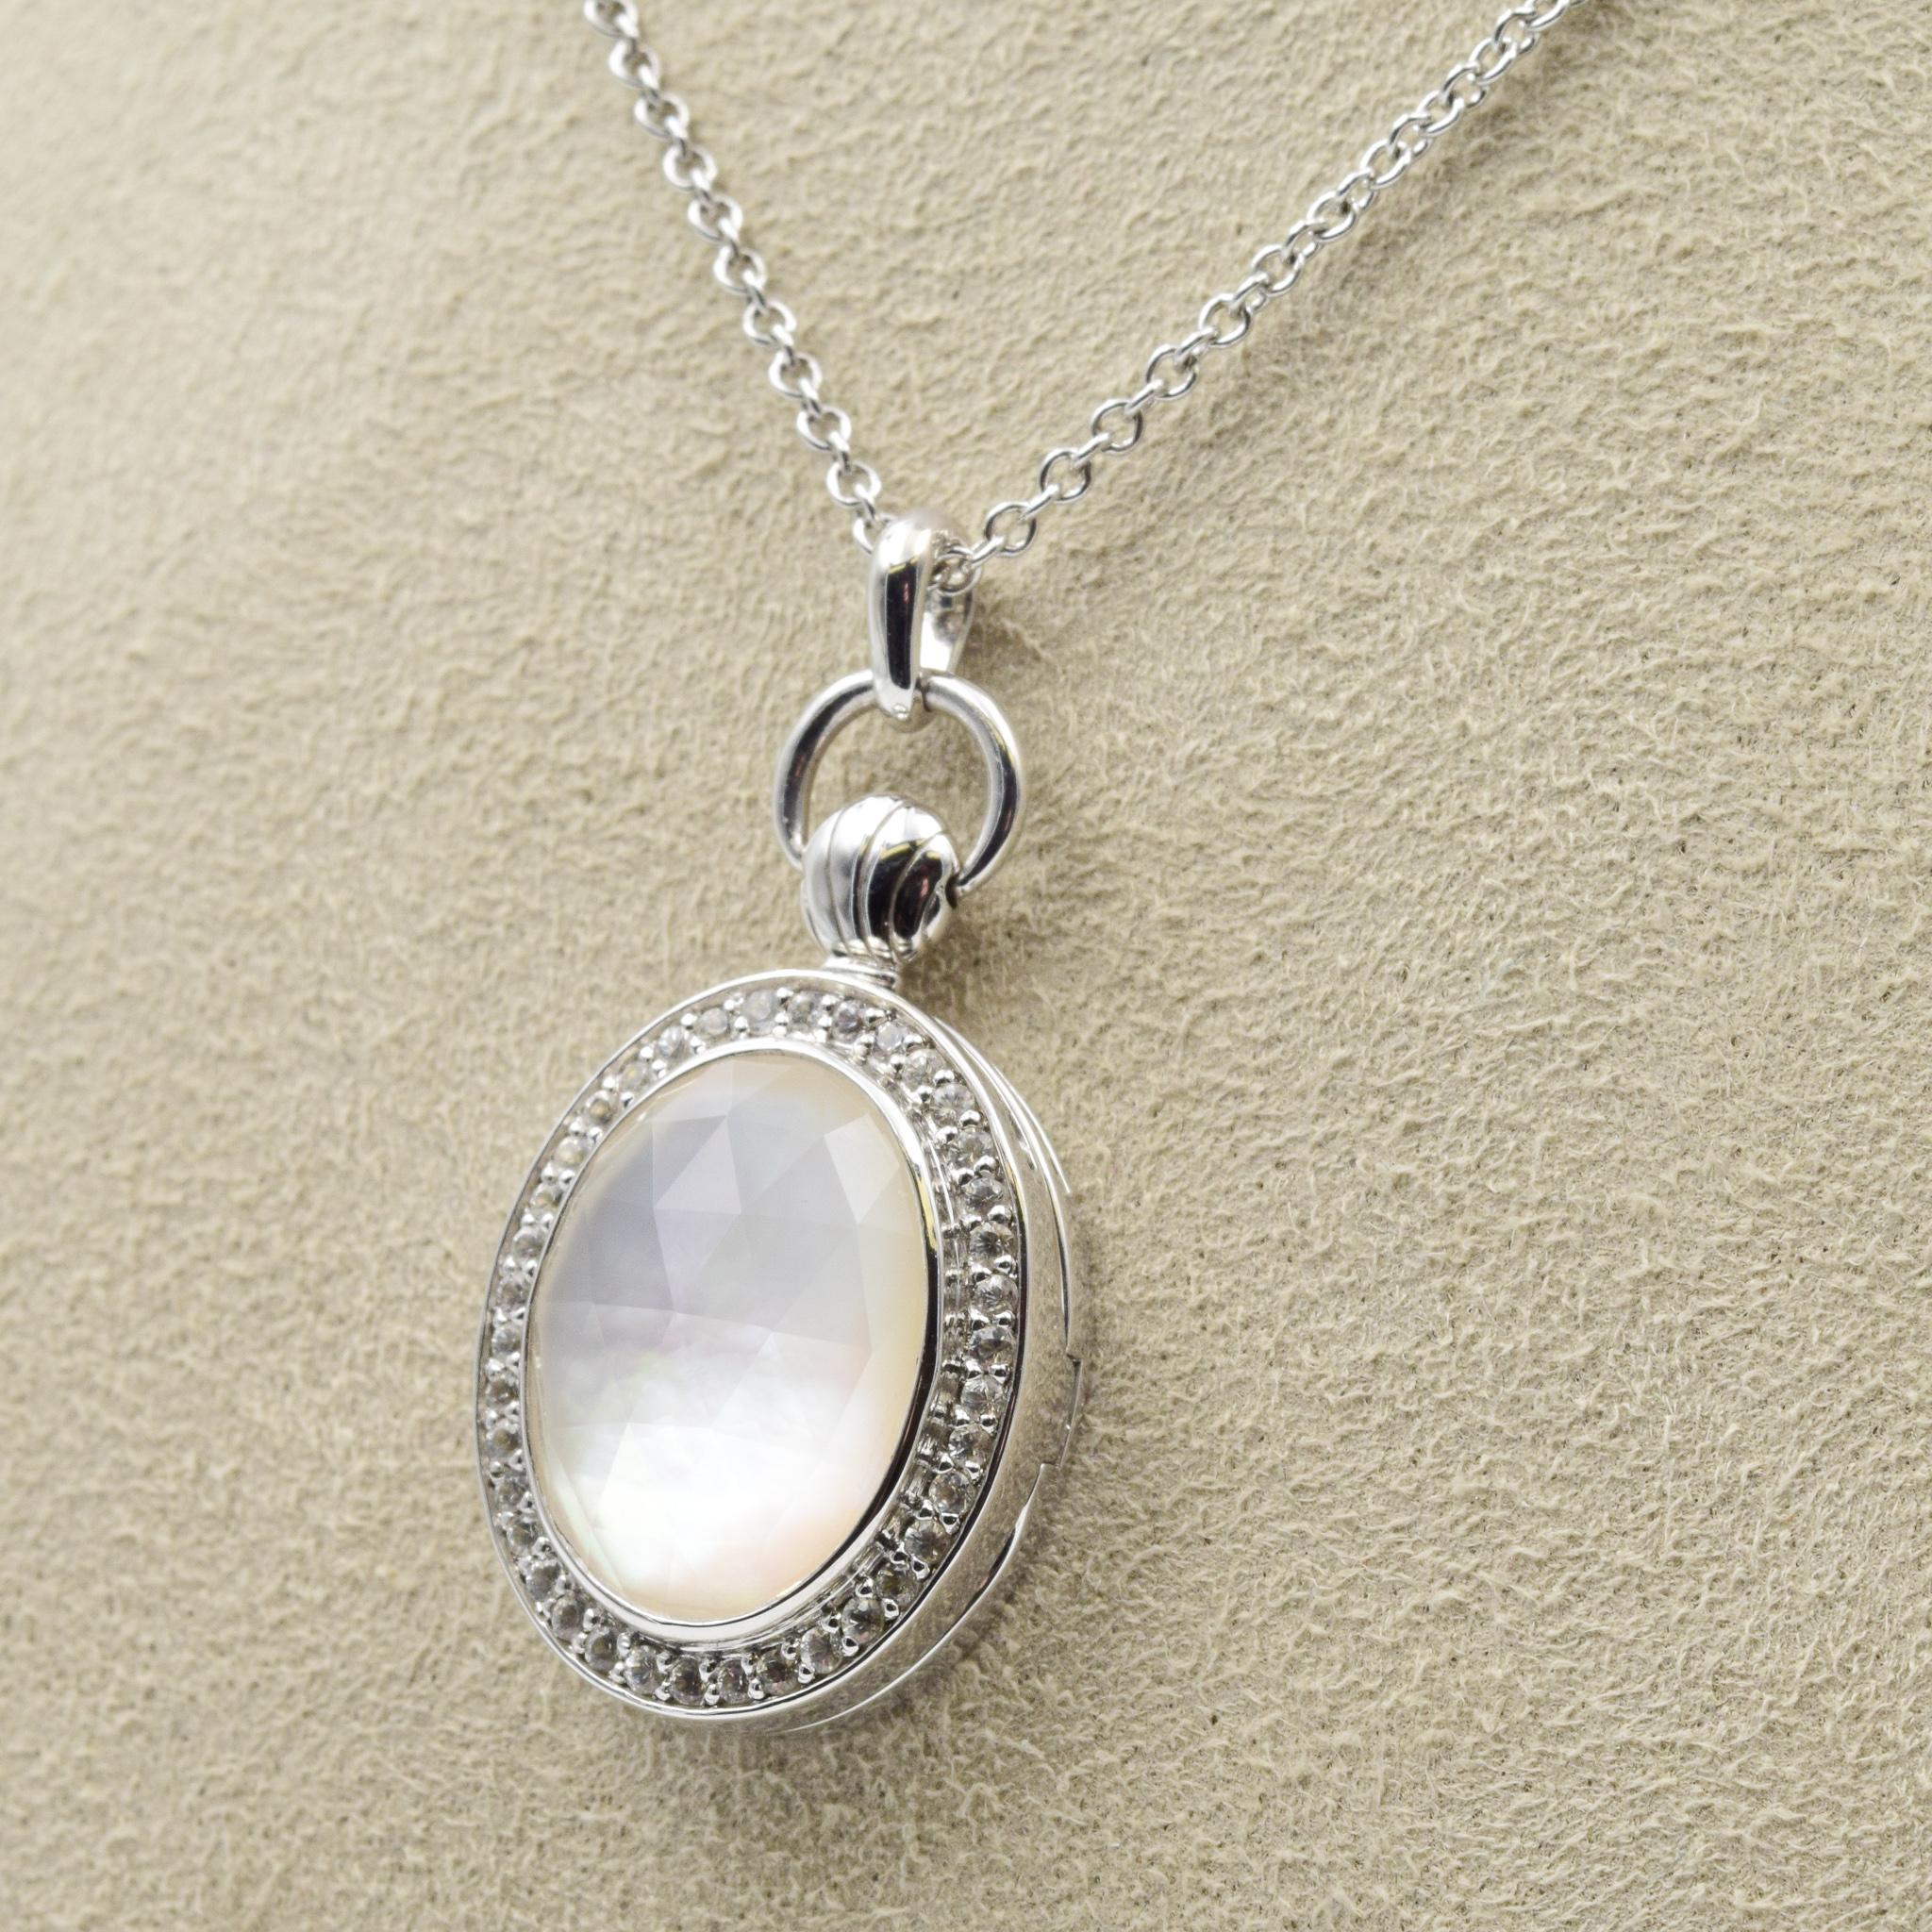 Sterling Silver
Set with Center Rock Crystal or Blue Topaz over Mother of Pearl and White Sapphires
18” Sterling Silver Chain
Locket Measures 1.18